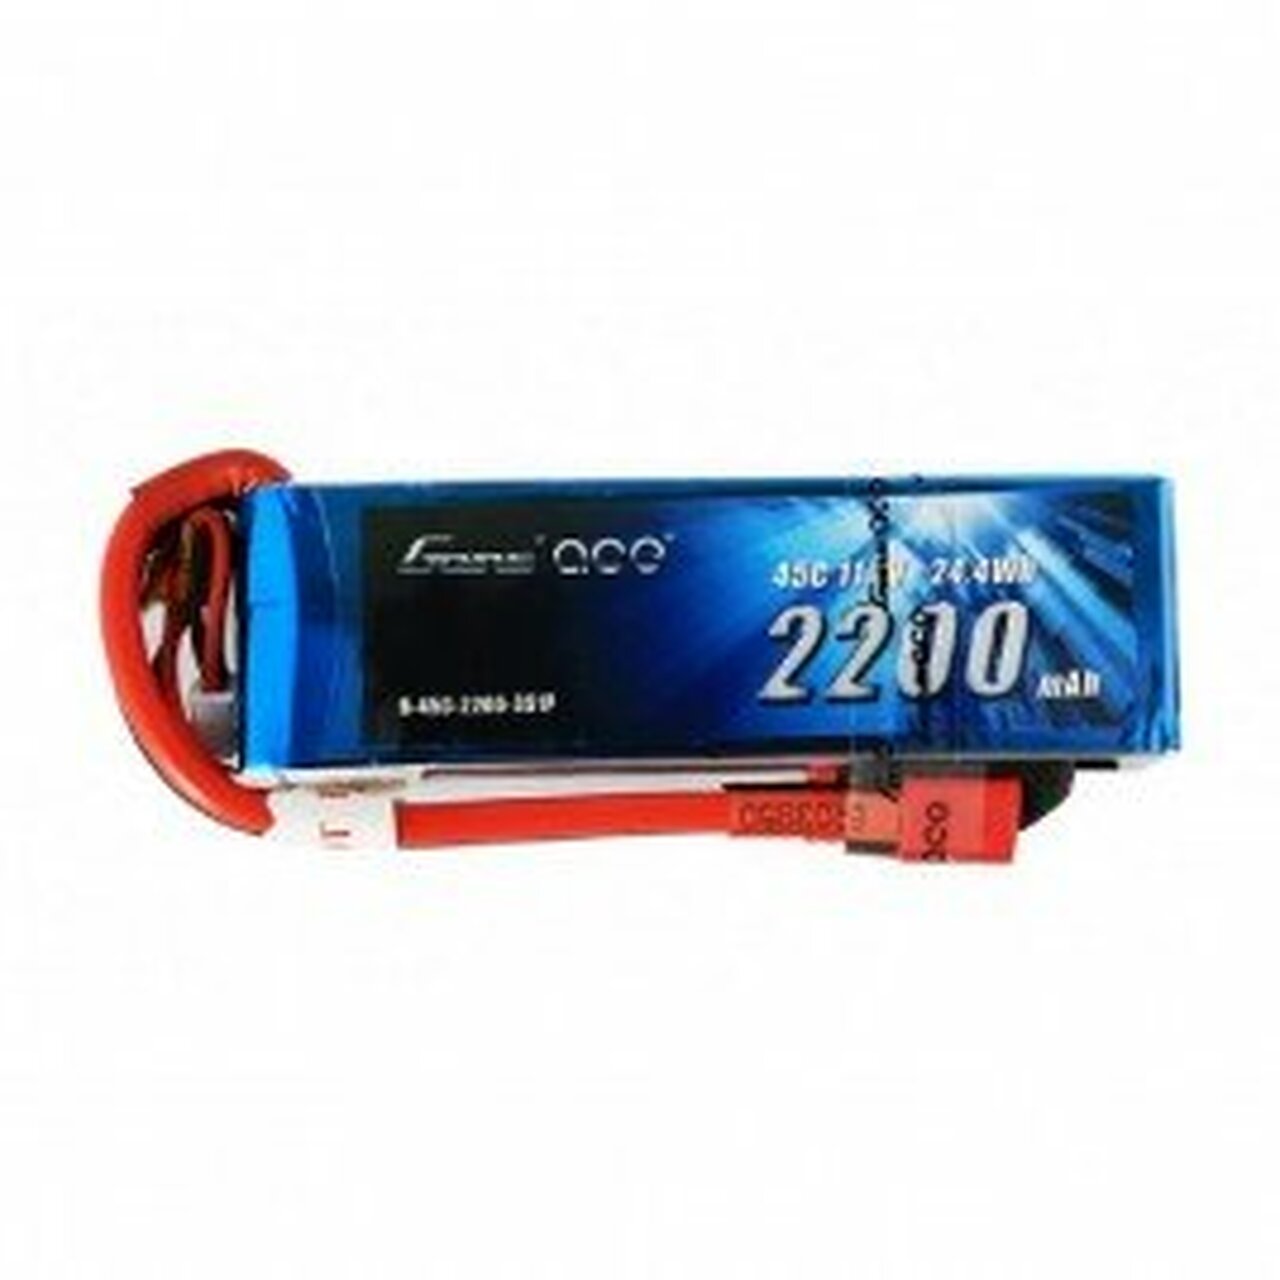 Gens ace 2200mAh 11.1V 45C 3S1P Lipo Battery Pack with Deans Plug